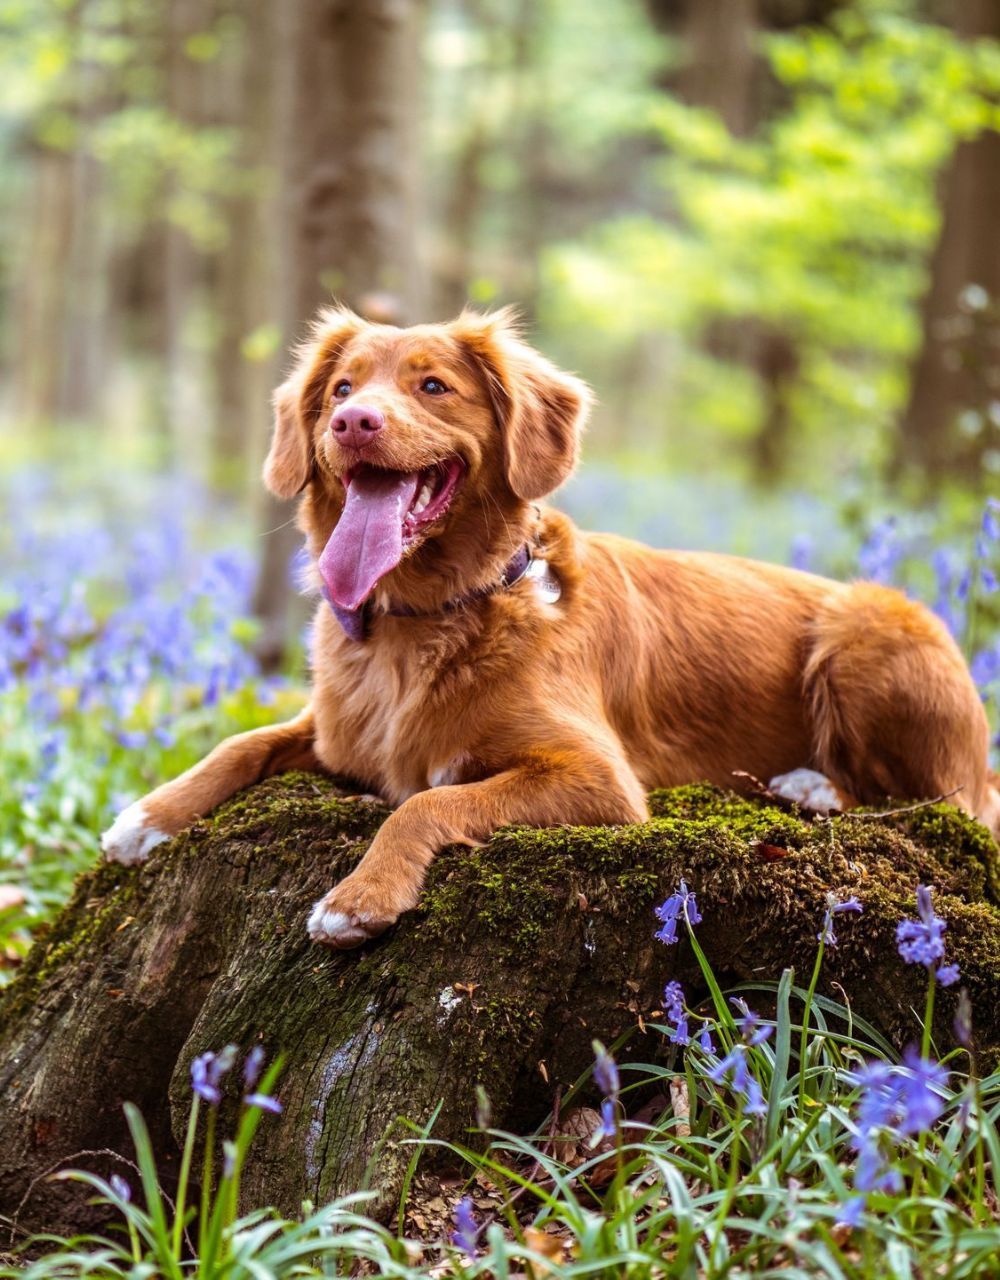 A brown dog is laying on a tree stump in the woods surrounded by bluebells.